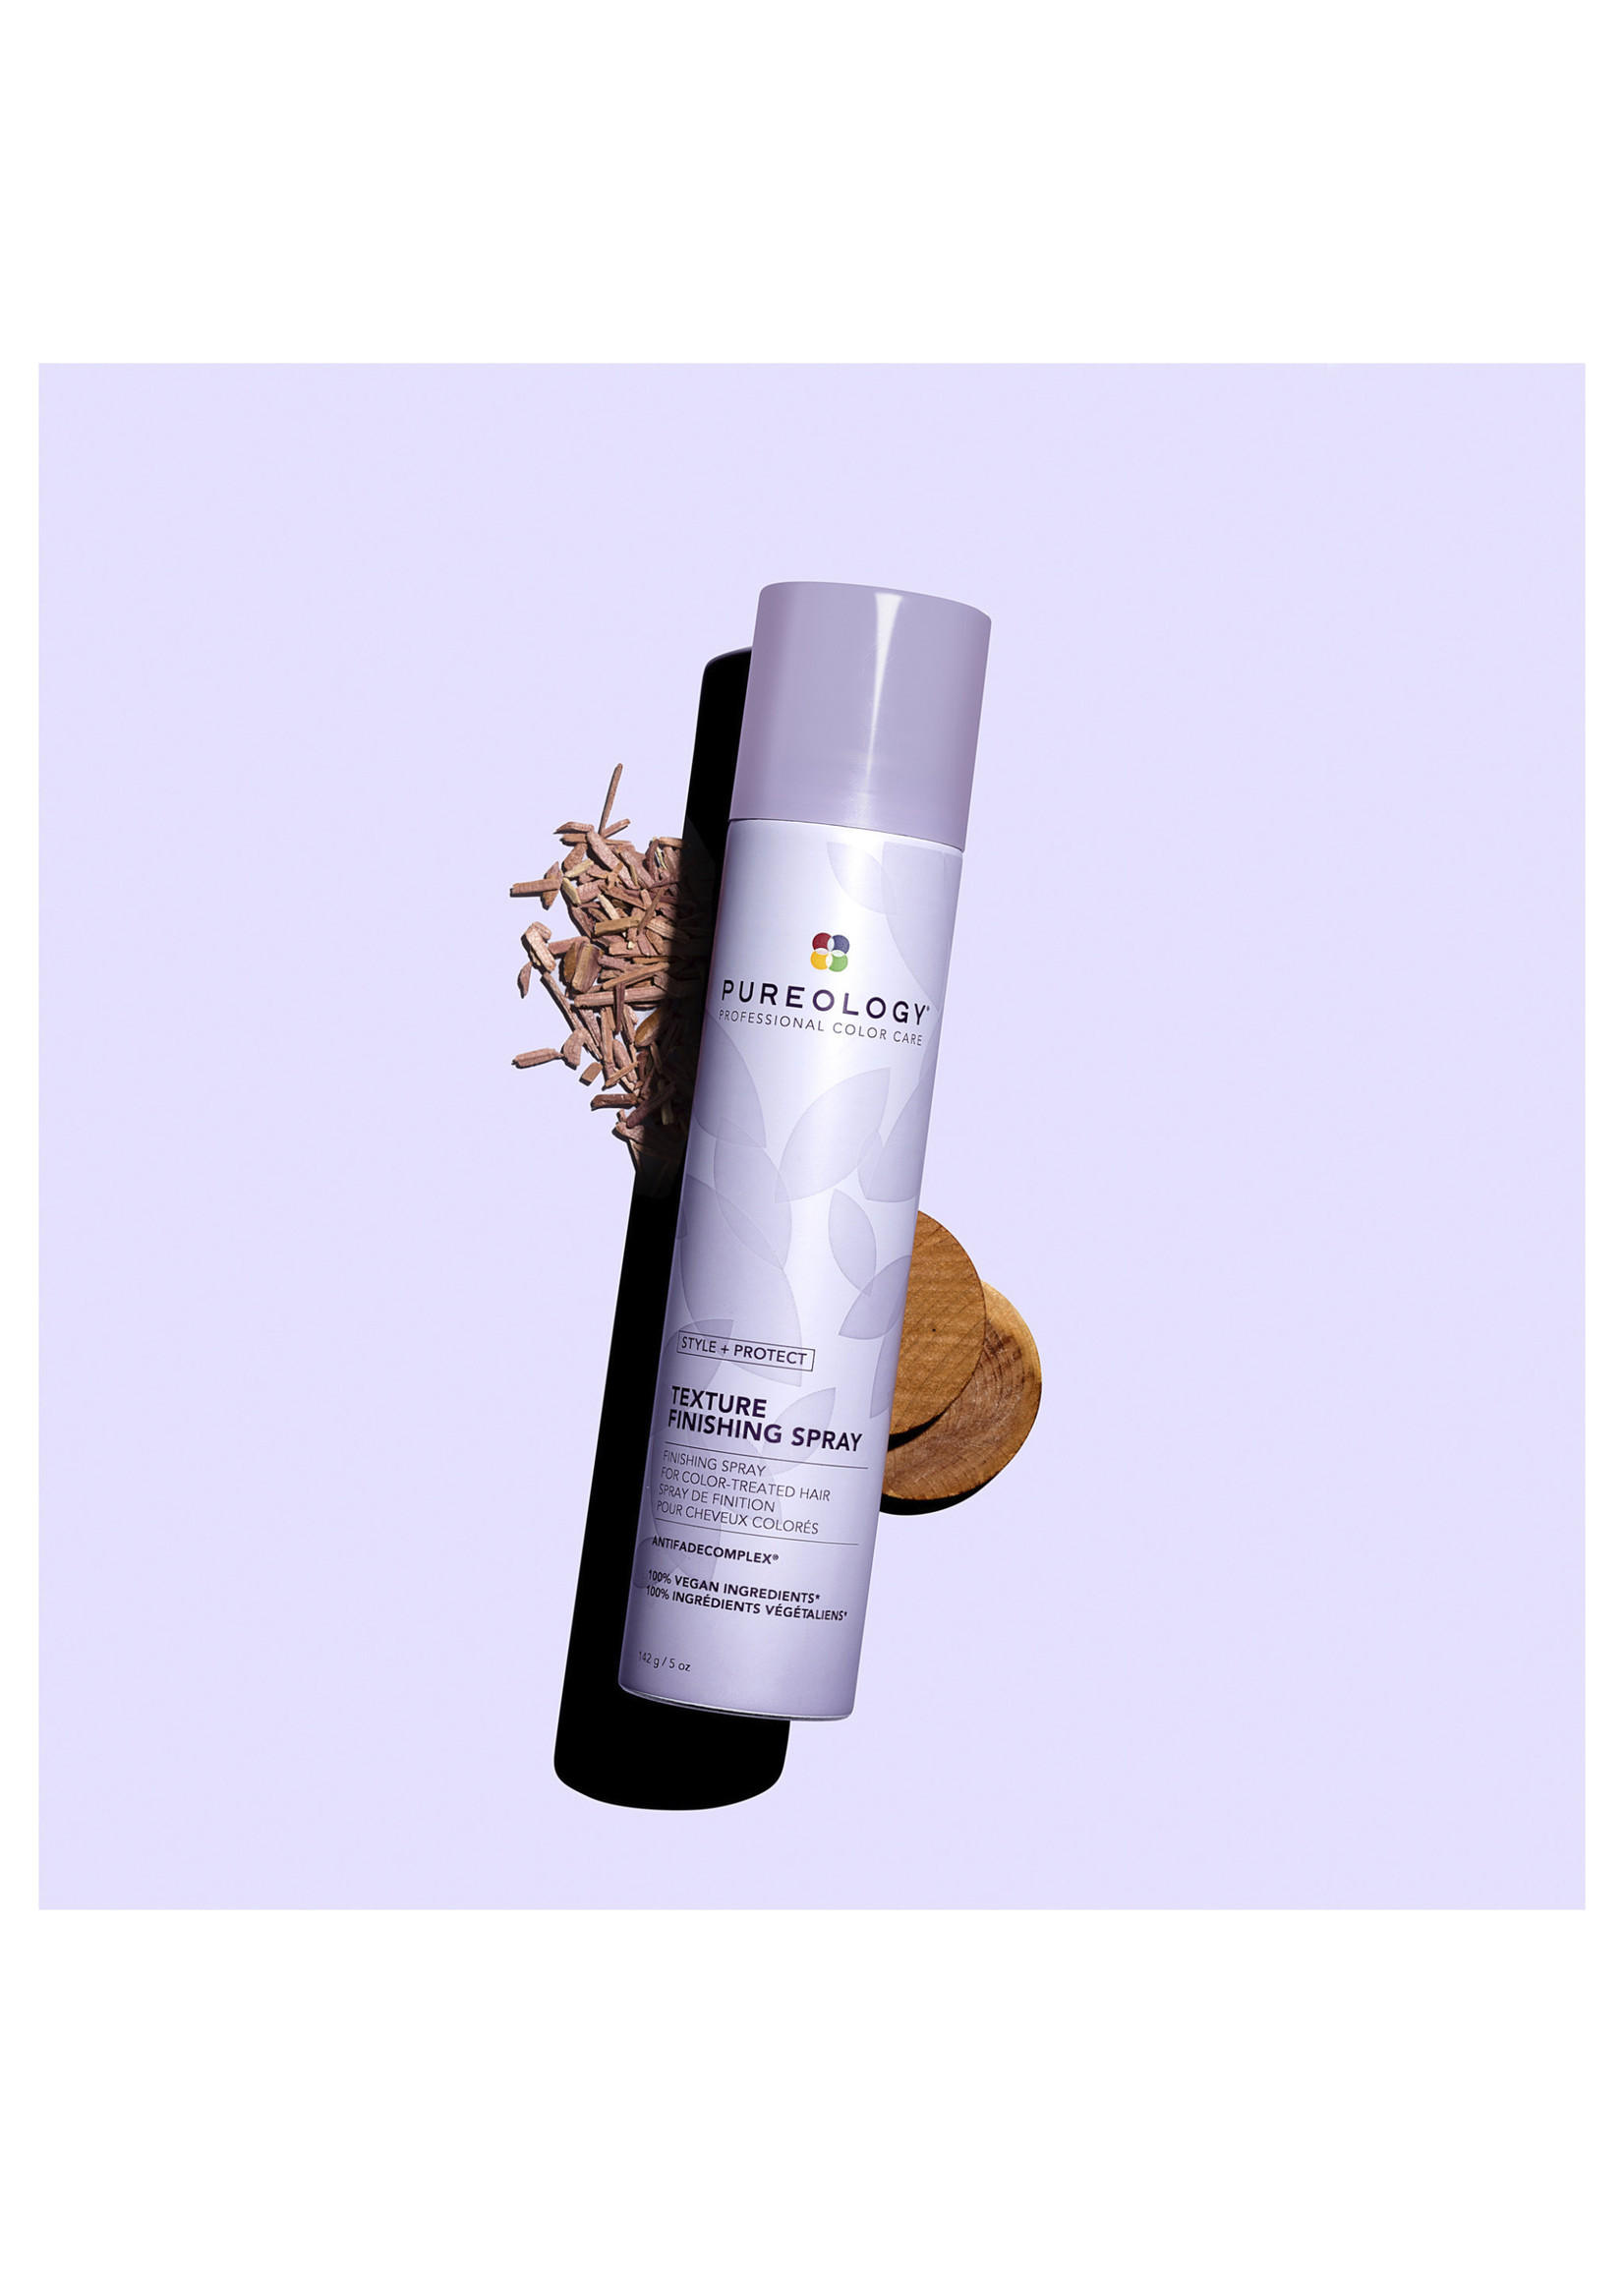 Pureology Pureology Style + Protect Texture Finishing Spray 142g